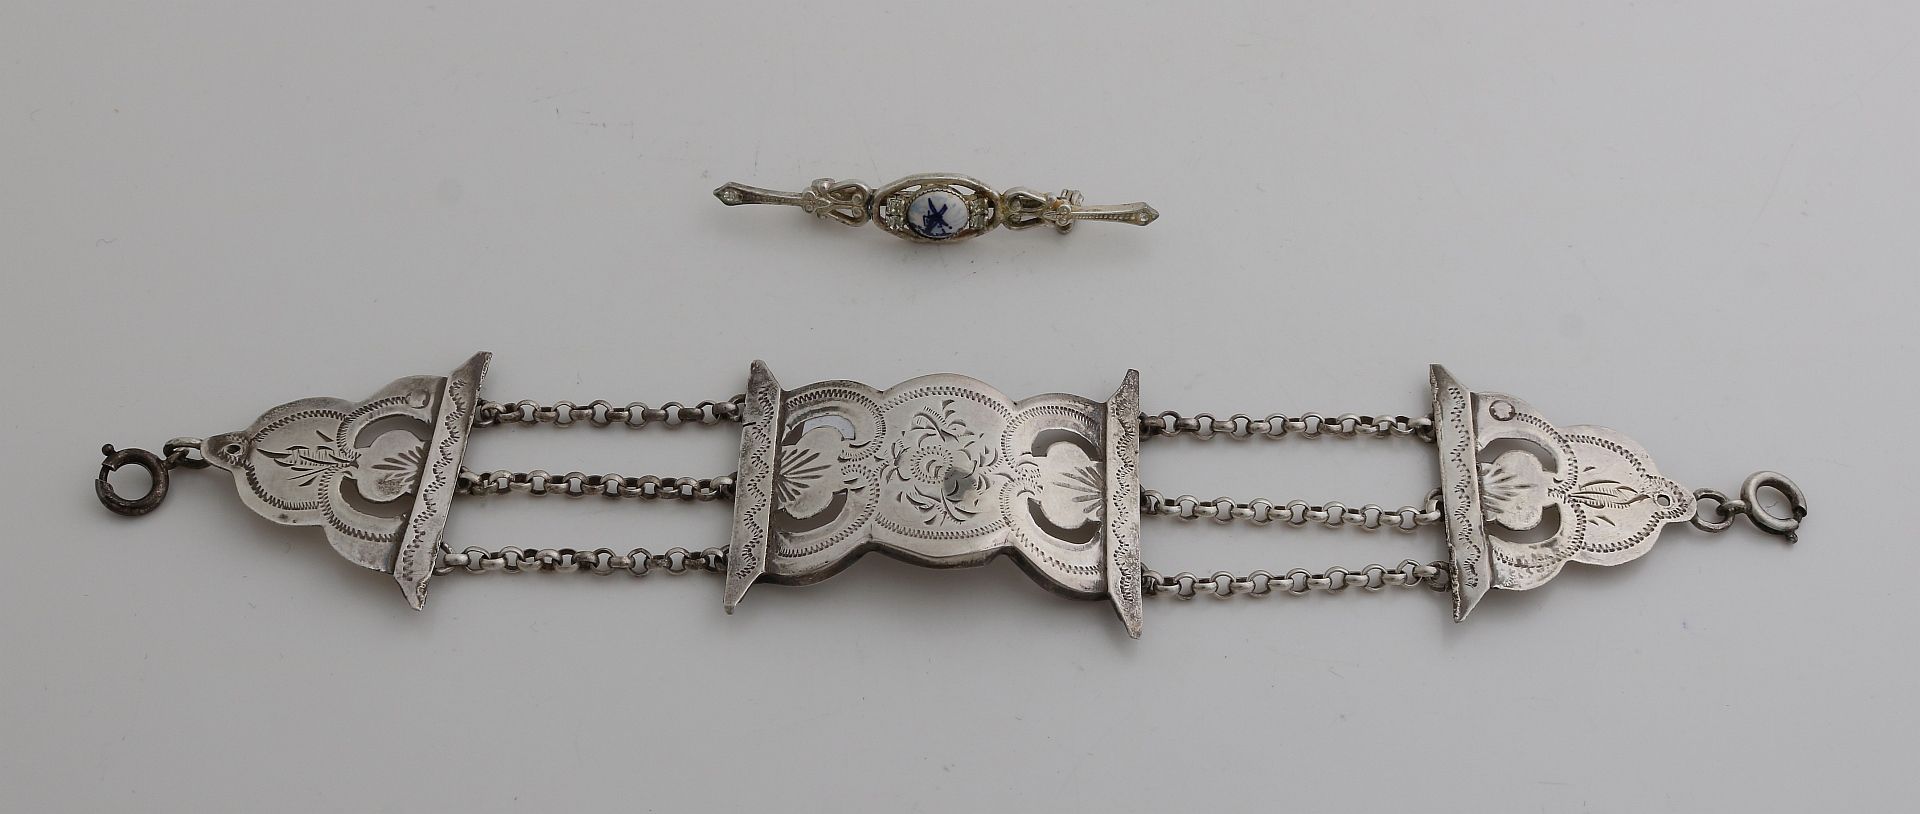 Silver bible clasp bracelet and brooch